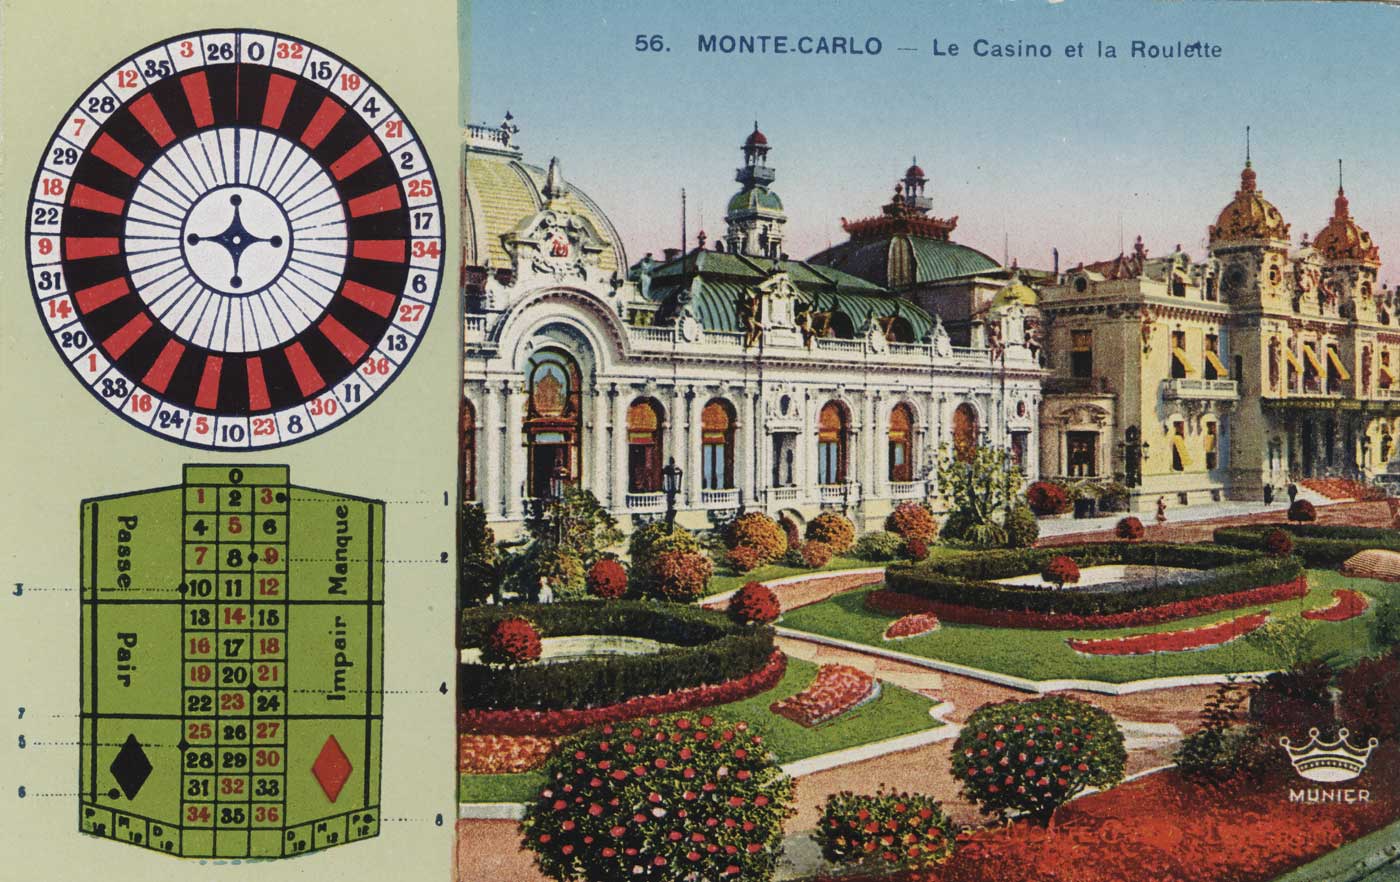 Postcard of Monte Carlo from Steinberg’s collection, c. 1950. Saul Steinberg Papers, Beinecke Rare Book and Manuscript Library, Yale University